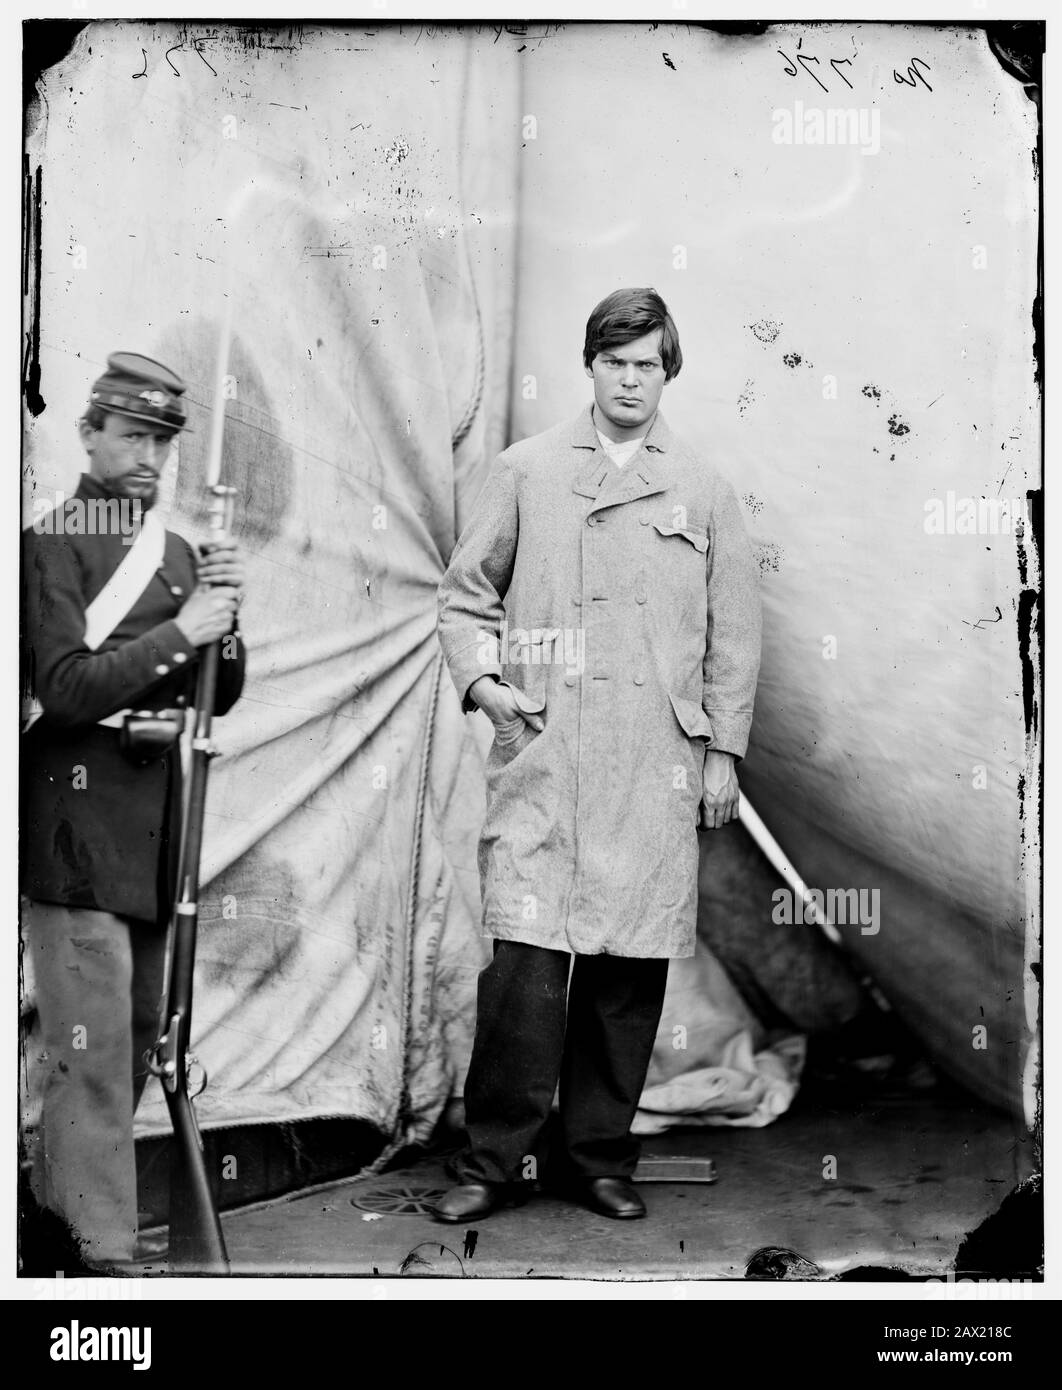 1865, Washington Navy Yard, D.C., USA : Assassination of President Lincoln . Lewis Powell aged 21 ( aka Lewis Payne or Paine , 1844 - 1865 ), a conspirator, in manacled  aboard the monitor USS Saugus . Photo by Alexander GARDNER ( 1821 - 1882 ).  The U.S.A. President ABRAHAM LINCOLN ( 1809 - 1865 ).  Lewis Thornton Powell ( April 22, 1844 – July 7, 1865 ), attempted unsuccessfully to assassinate United States Secretary of State William H. Seward, and was one of four people hanged for the Lincoln assassination conspiracy. On April 13, John Wilkes Booth, George Atzerodt and David Herold all met Stock Photo